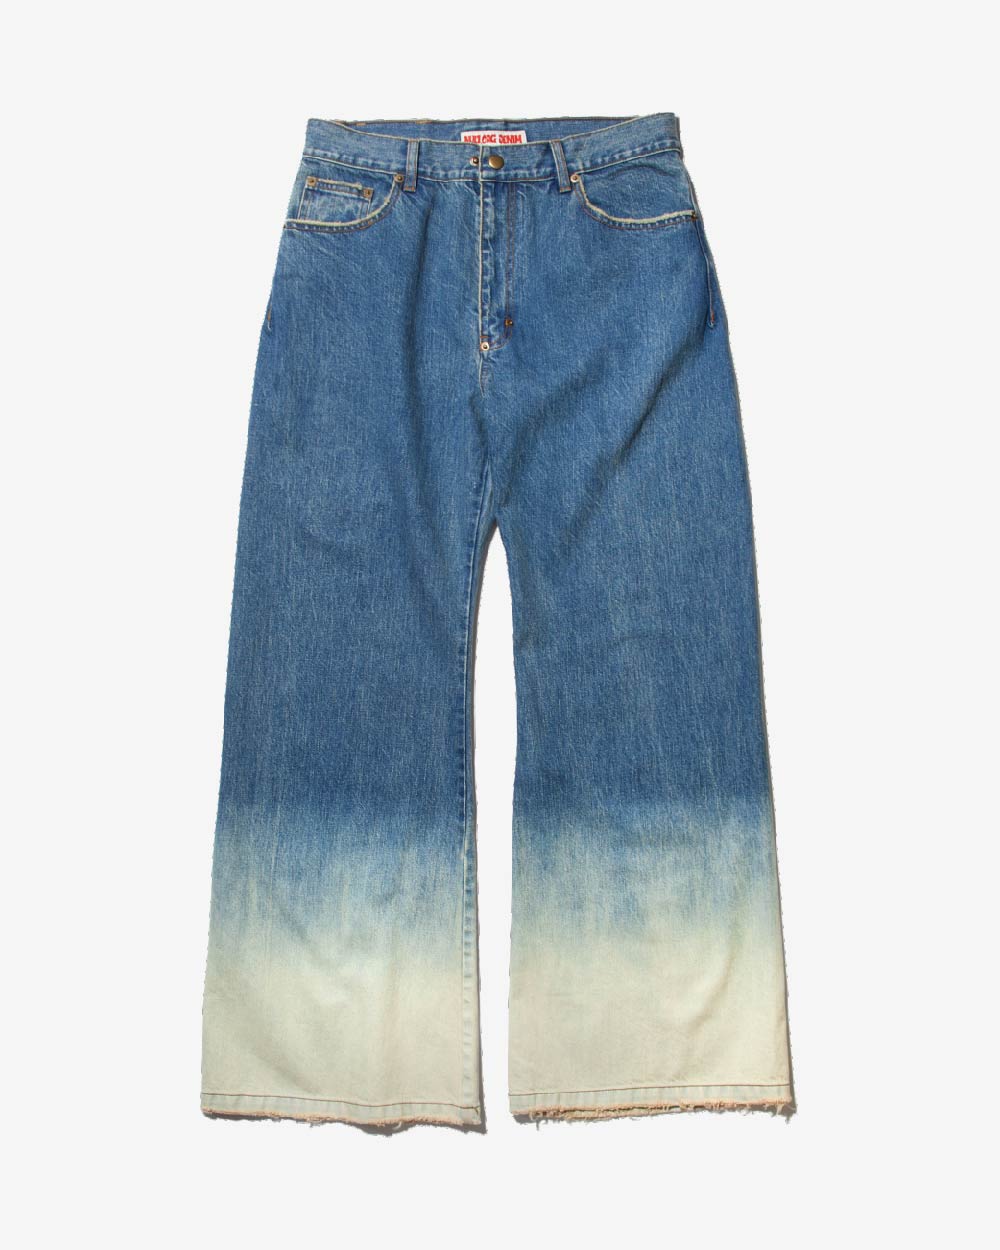 1986 Jeans